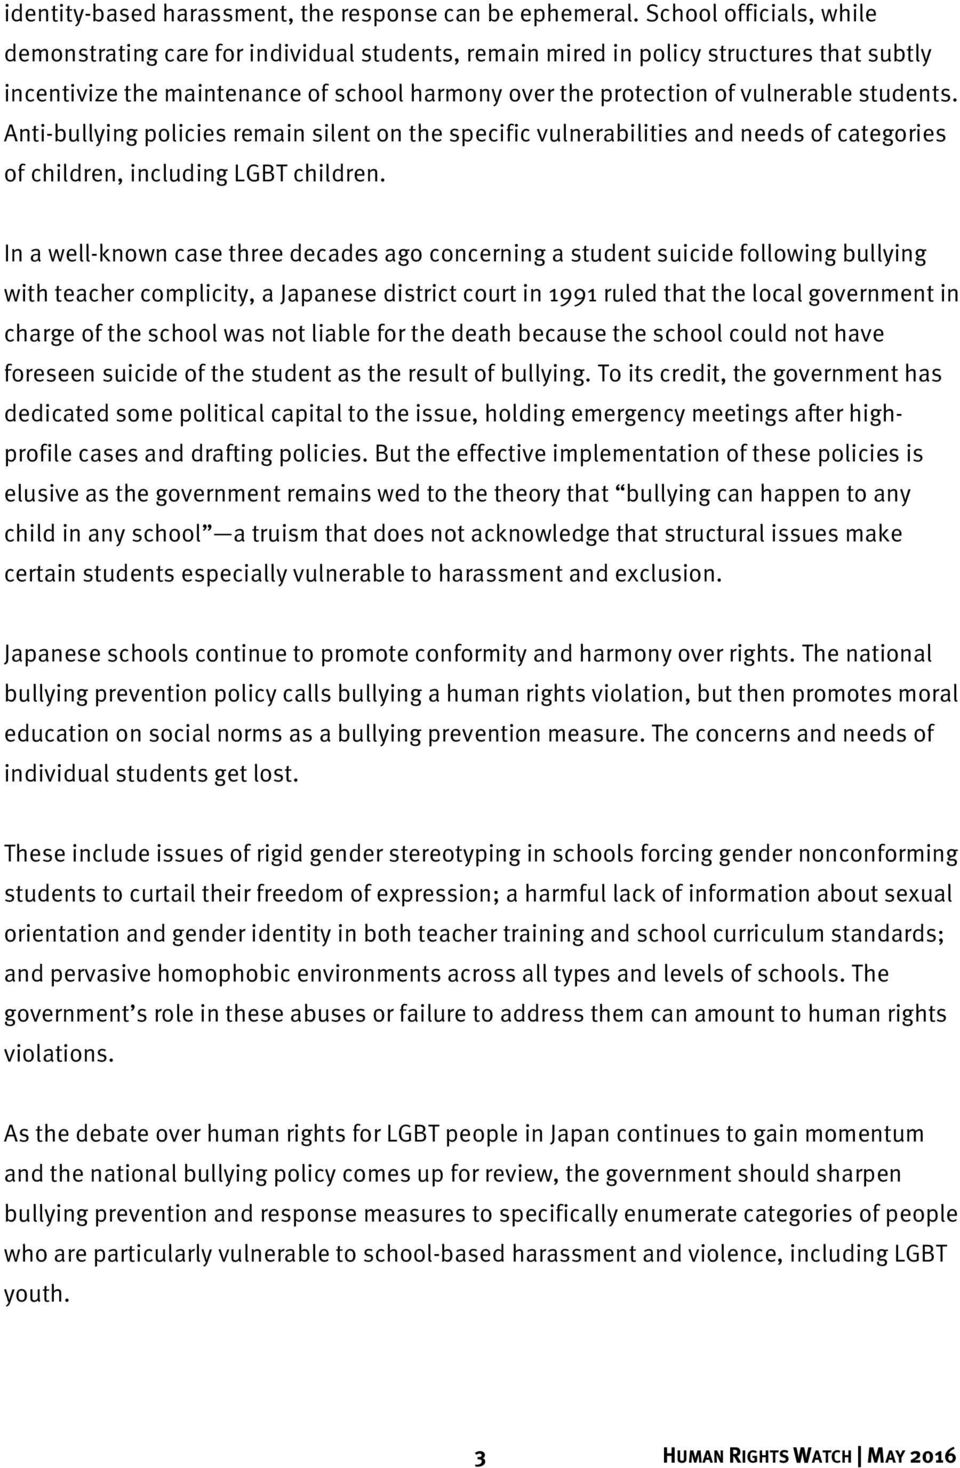 students. Anti-bullying policies remain silent on the specific vulnerabilities and needs of categories of children, including LGBT children.